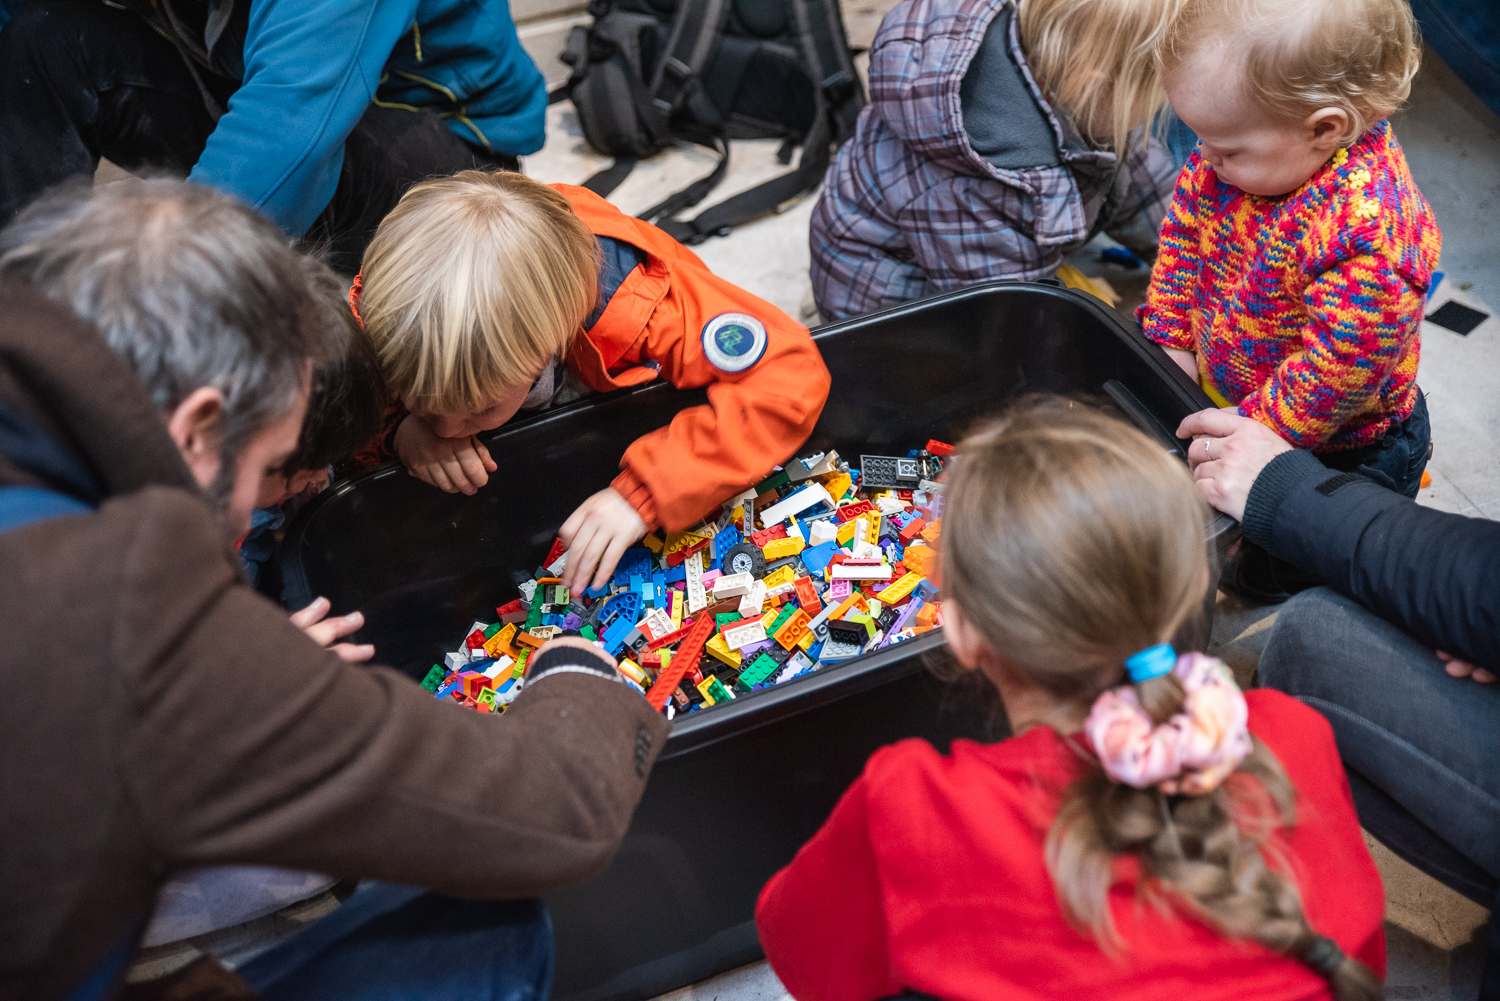 A group of children and adults kneel around a box of LEGO selecting bricks.